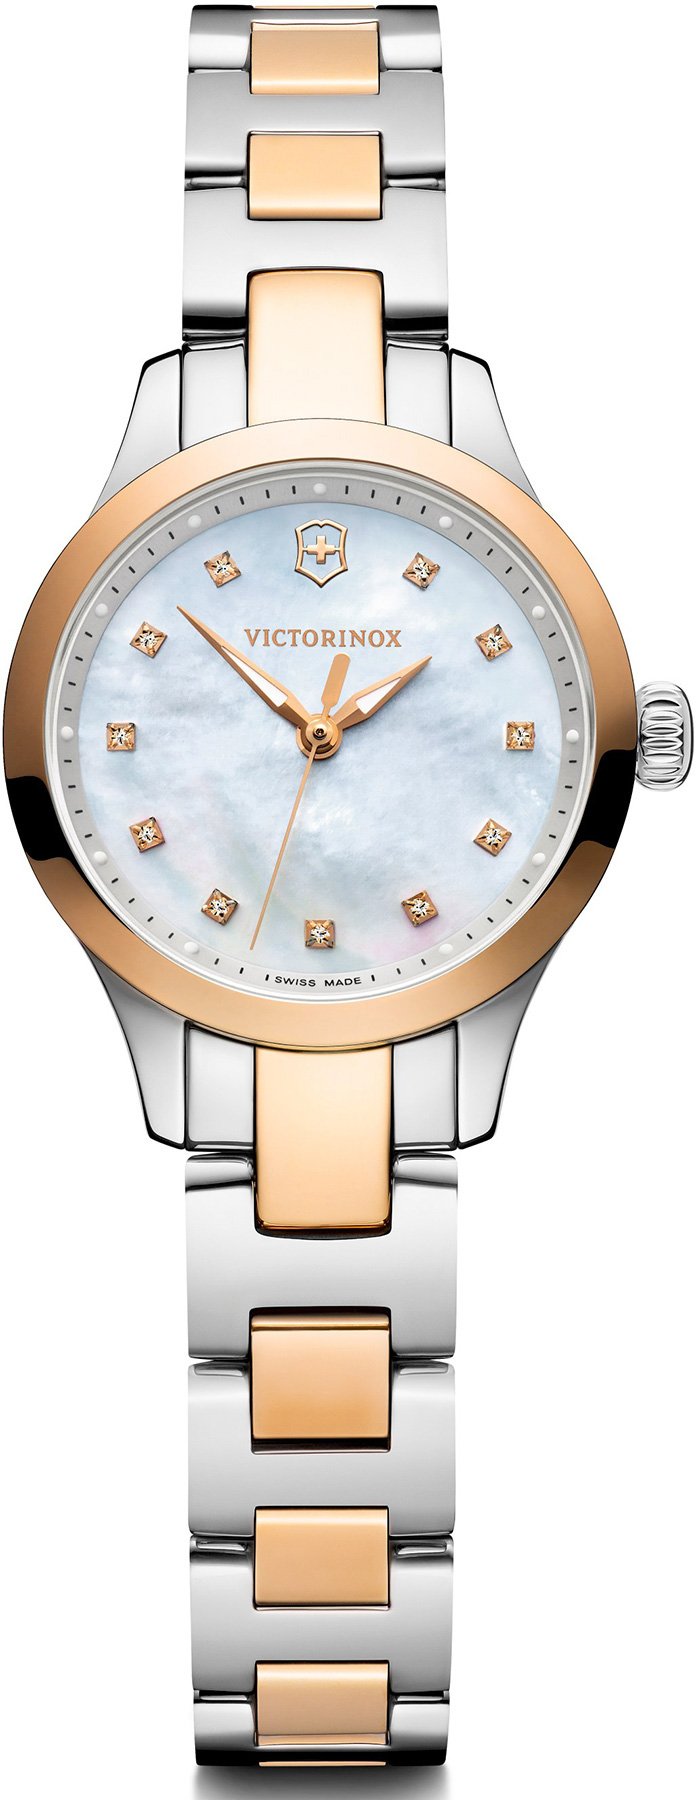 Victorinox Alliance Xs Quartz Crystal Ladies Watch 241877 In Gold Tone / Mop / Mother Of Pearl